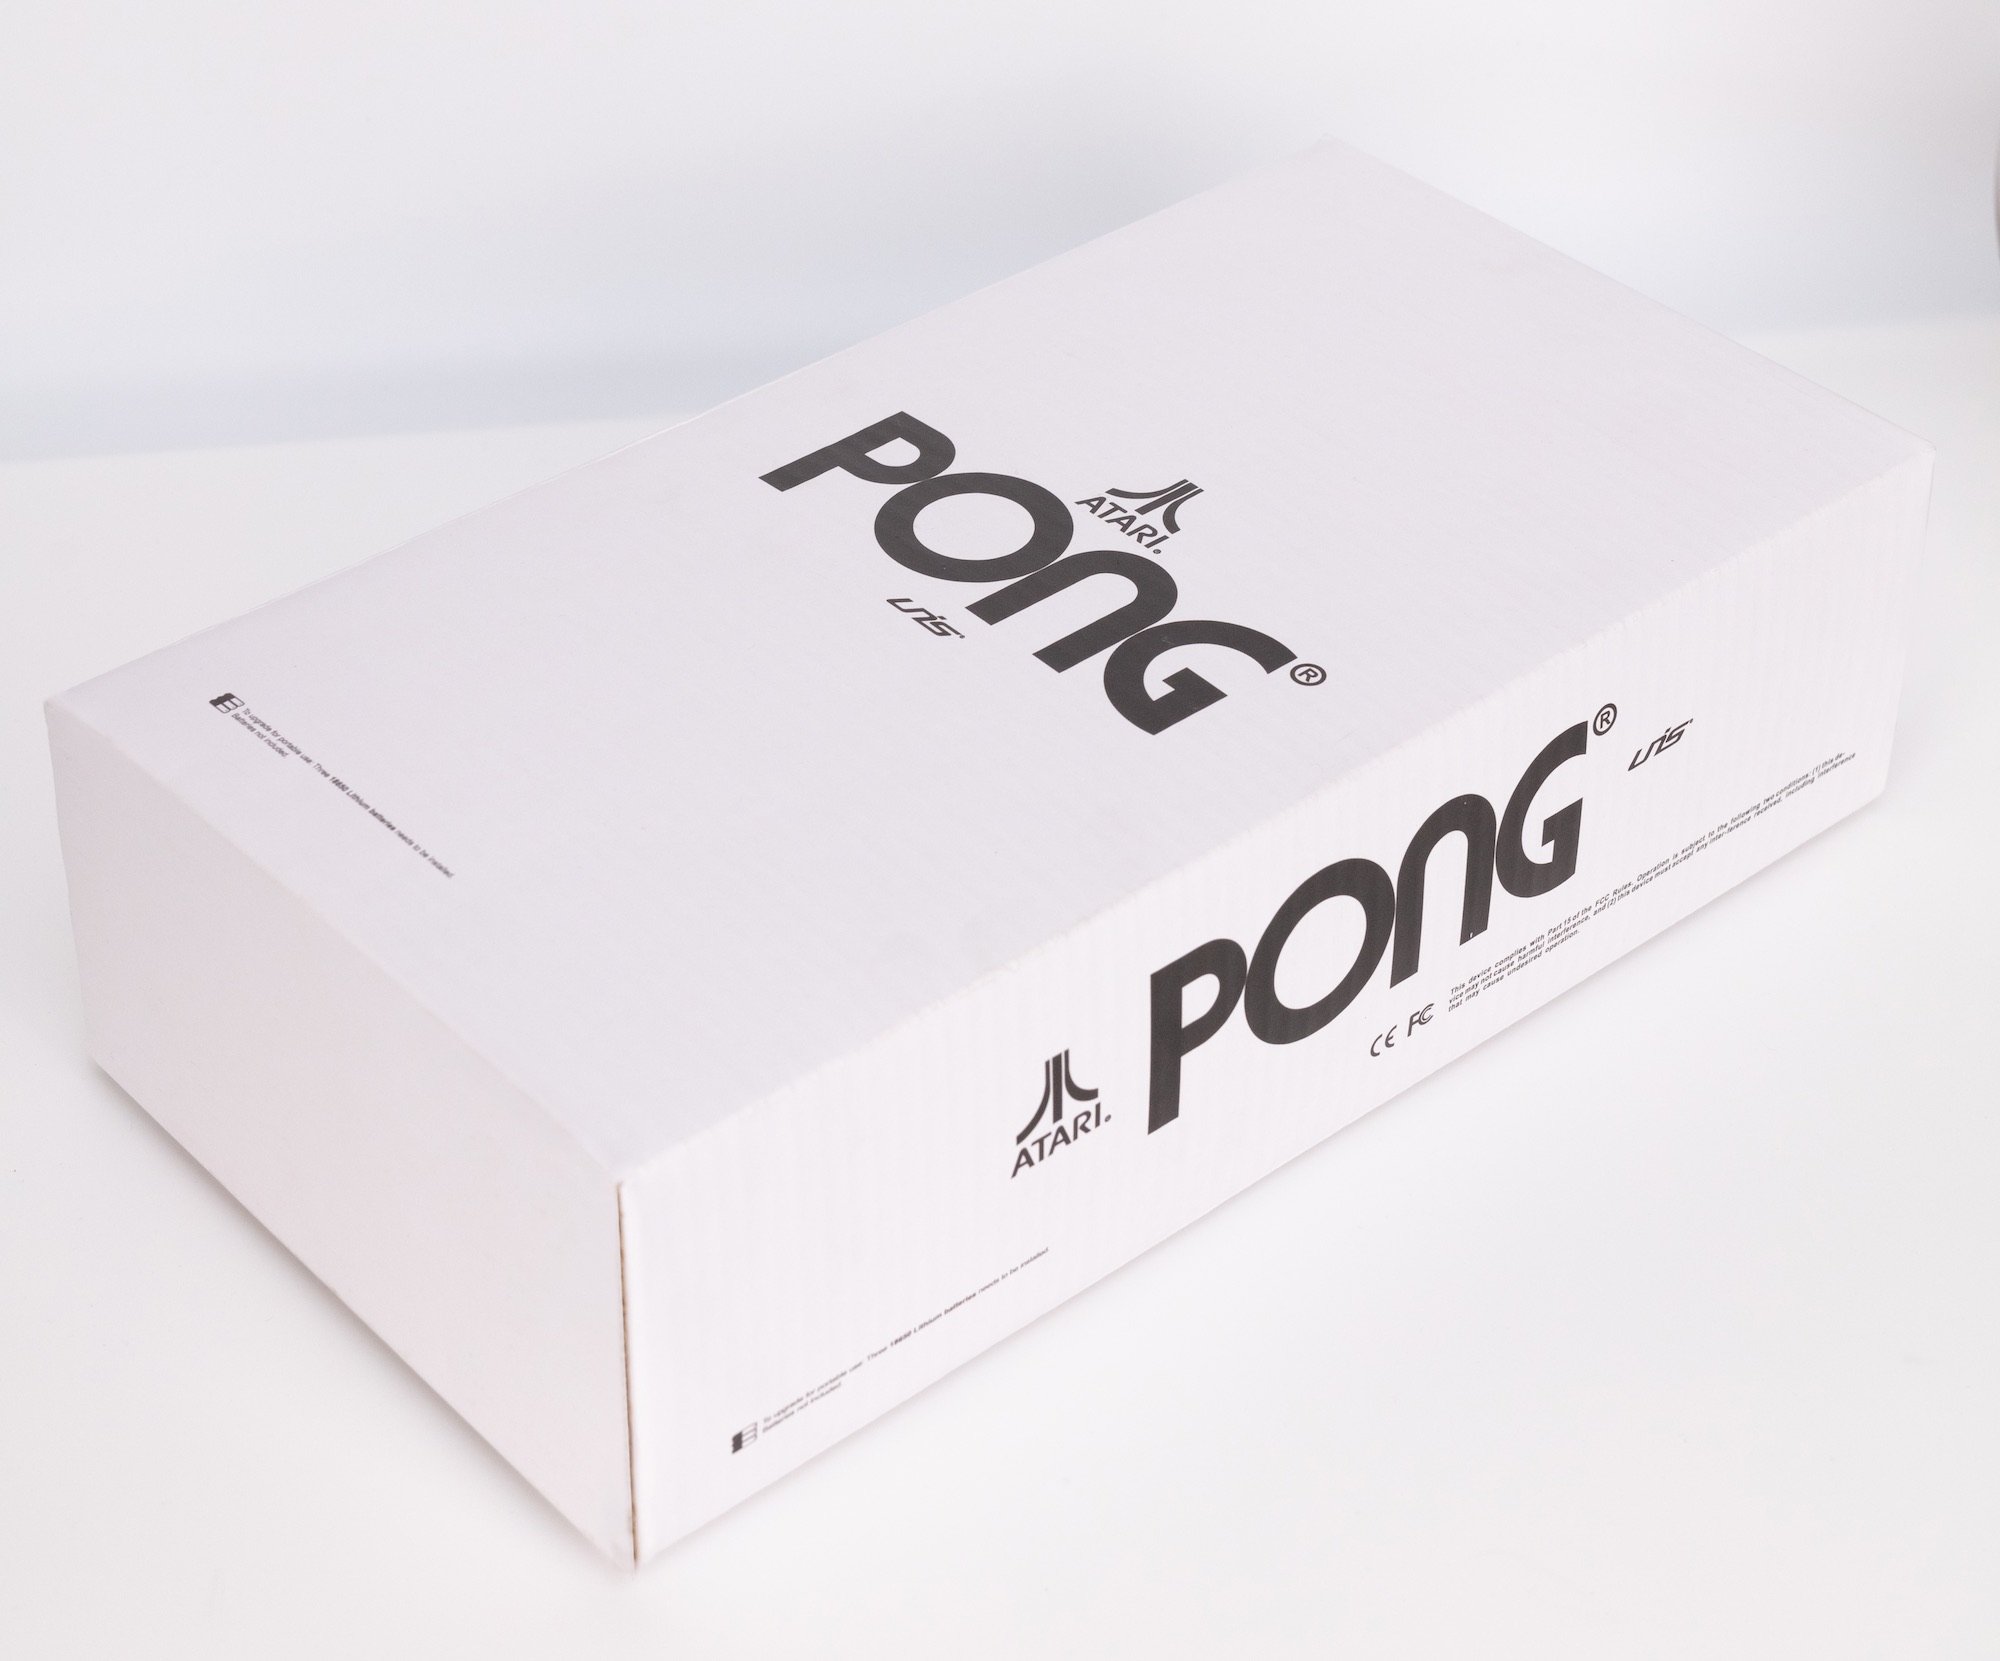 Atari unveils new mini PONG arcade with 7.9-inch display - 9to5Toys